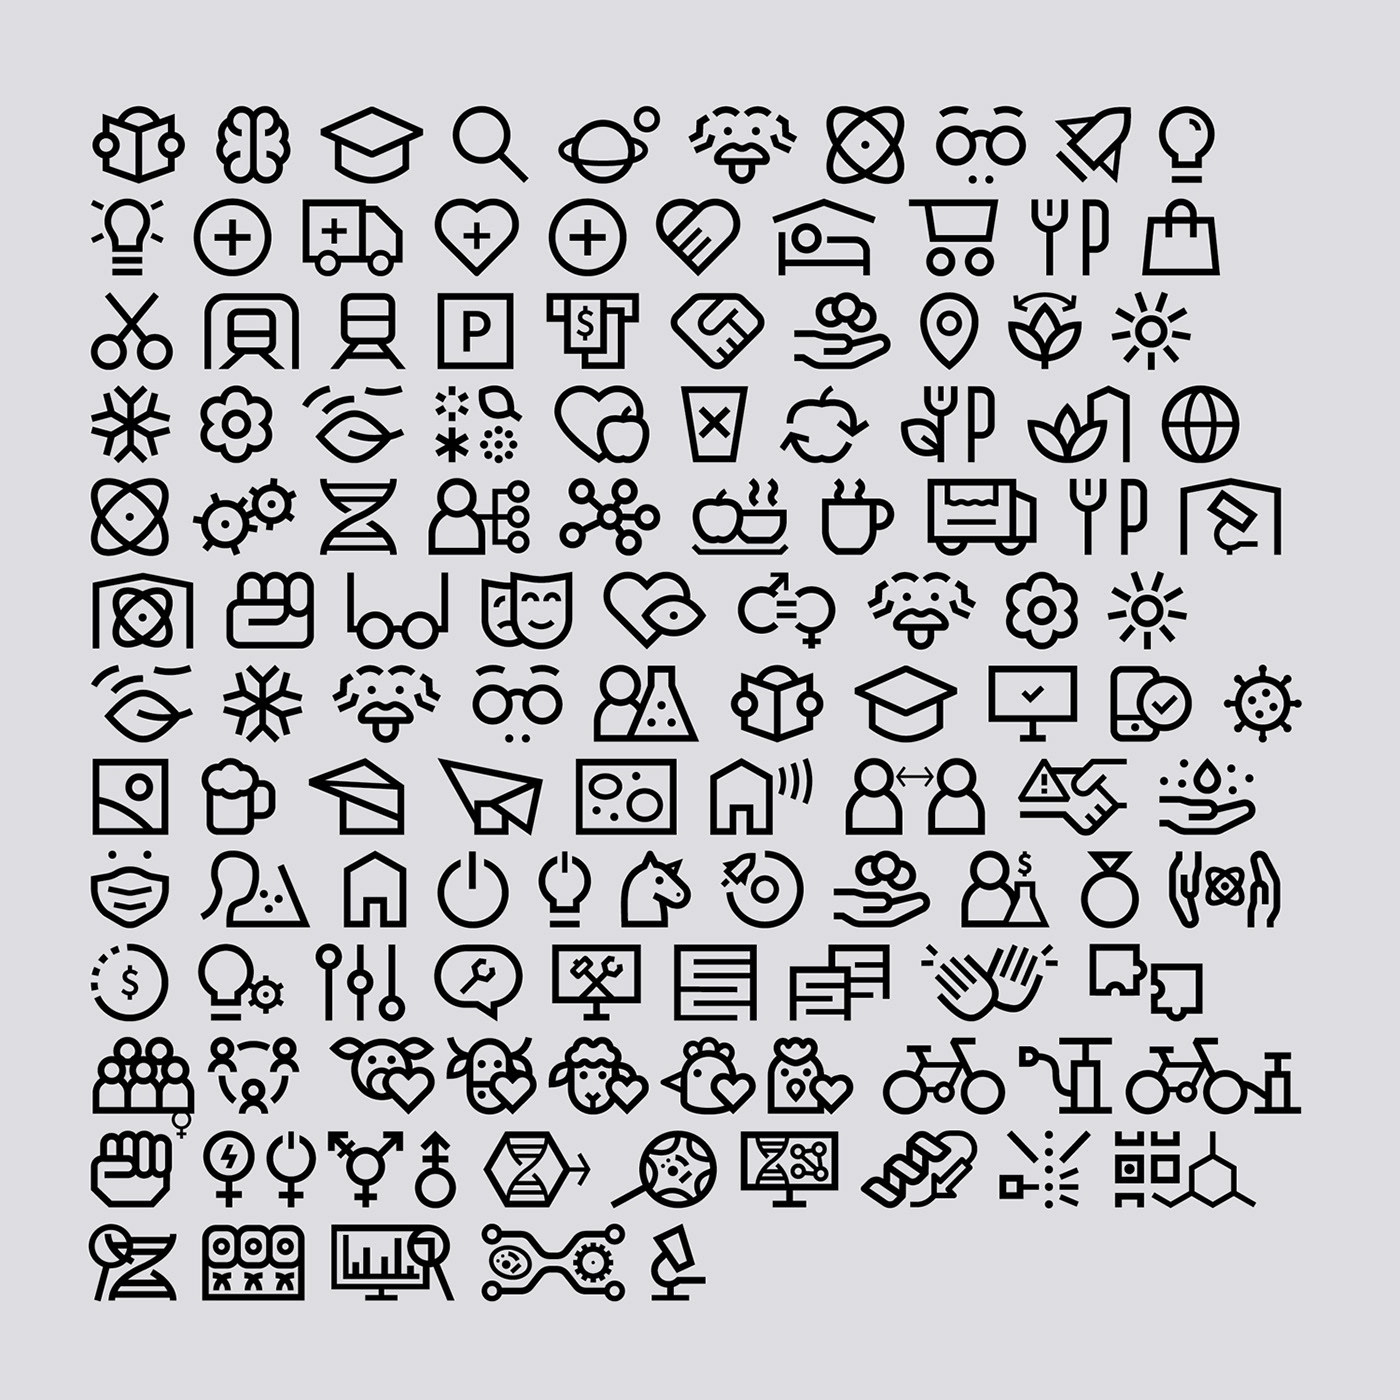 font icons pictograms science typedesign